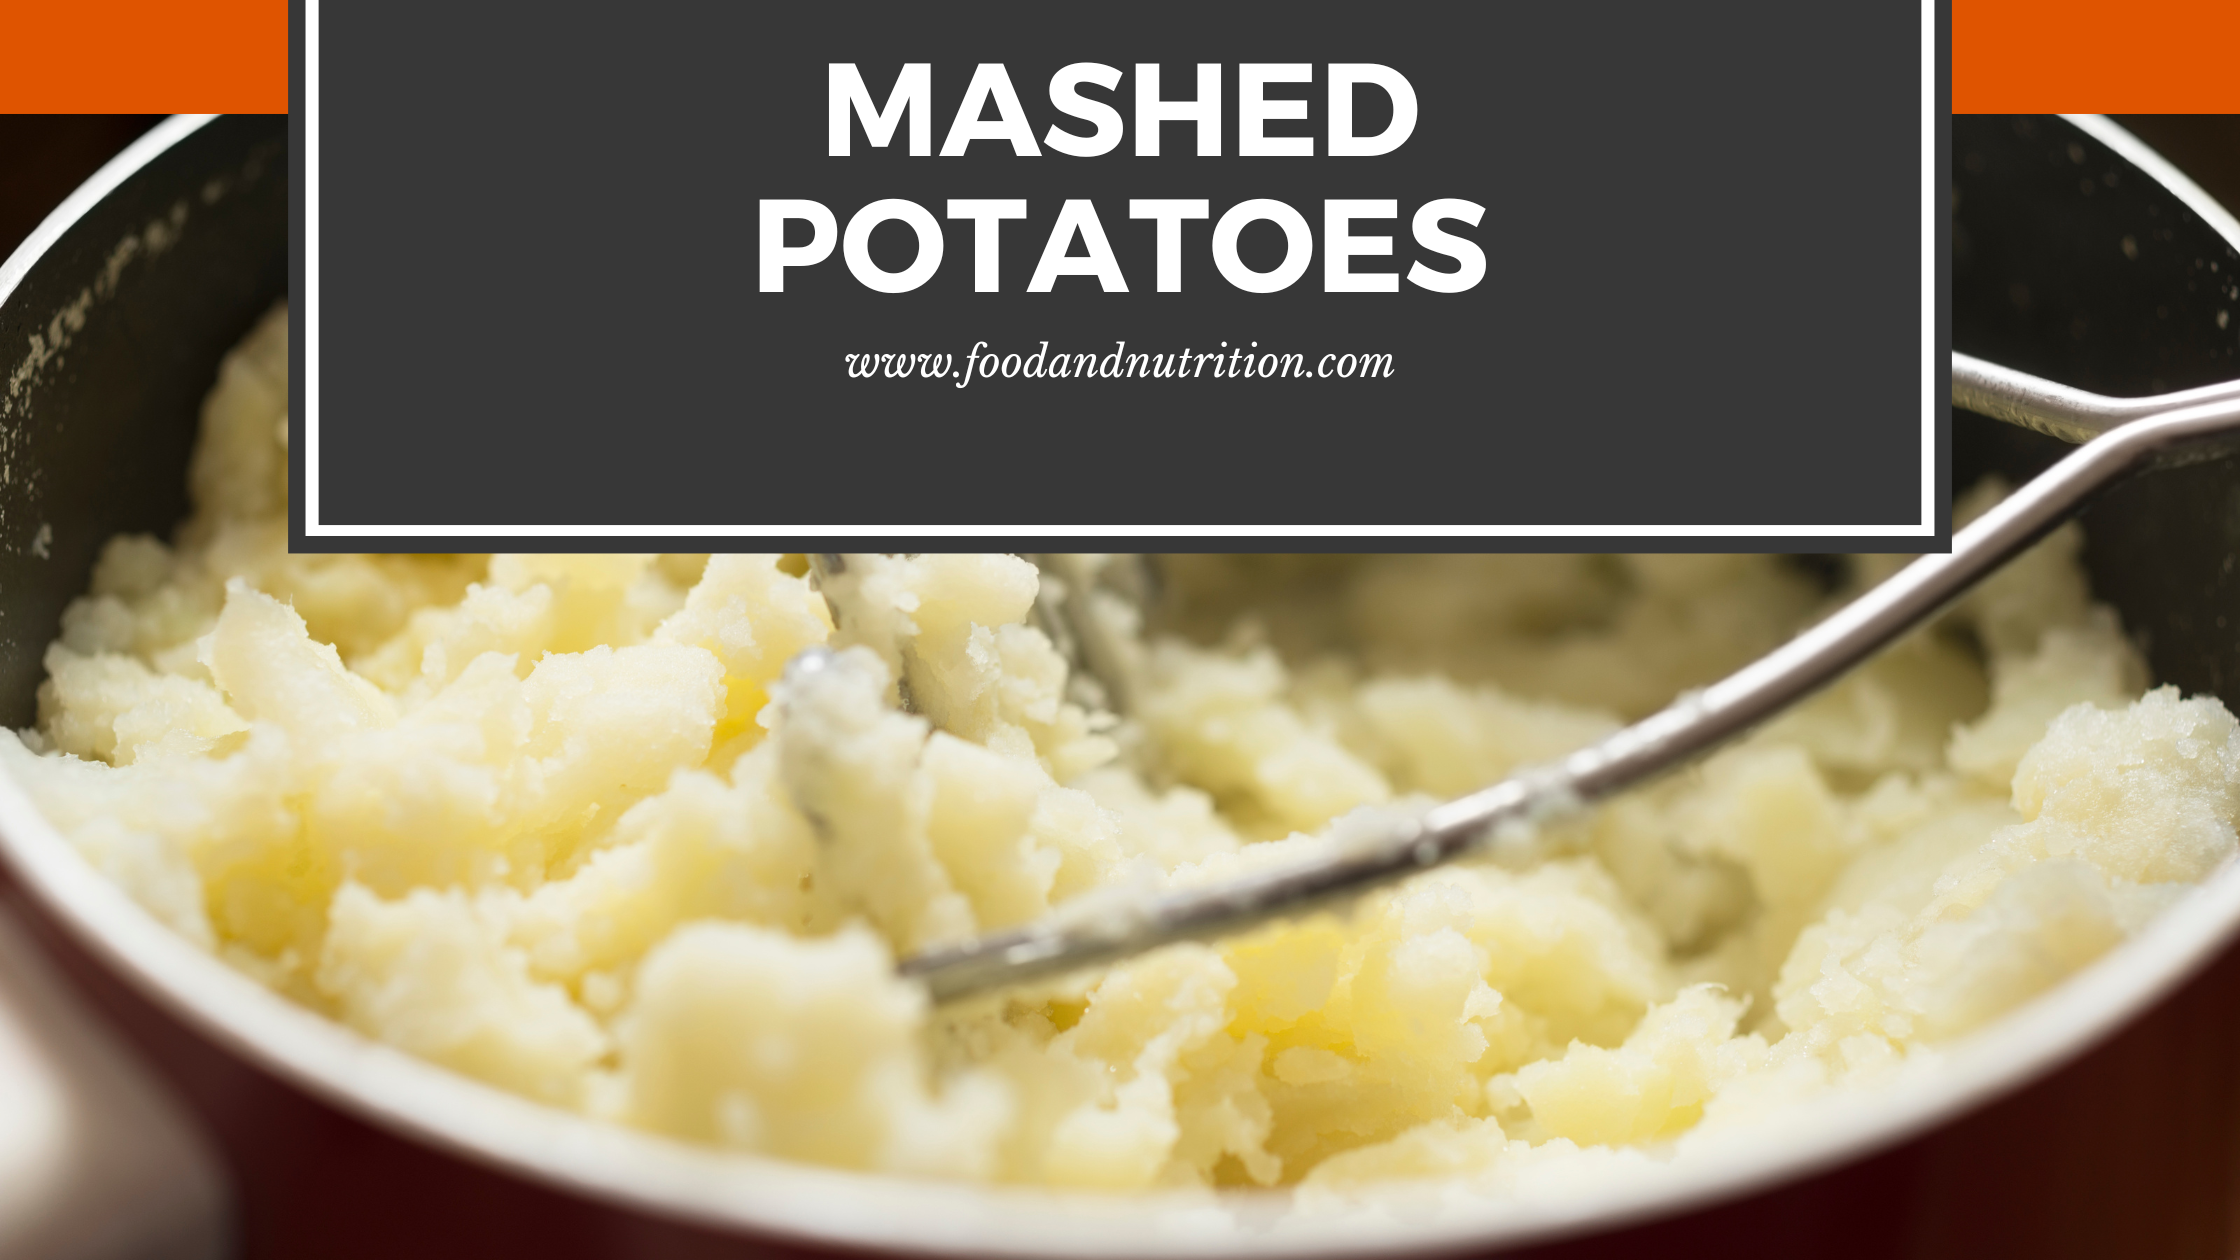 Mashed Potatoes: A Timeless Comfort and Culinary Delight